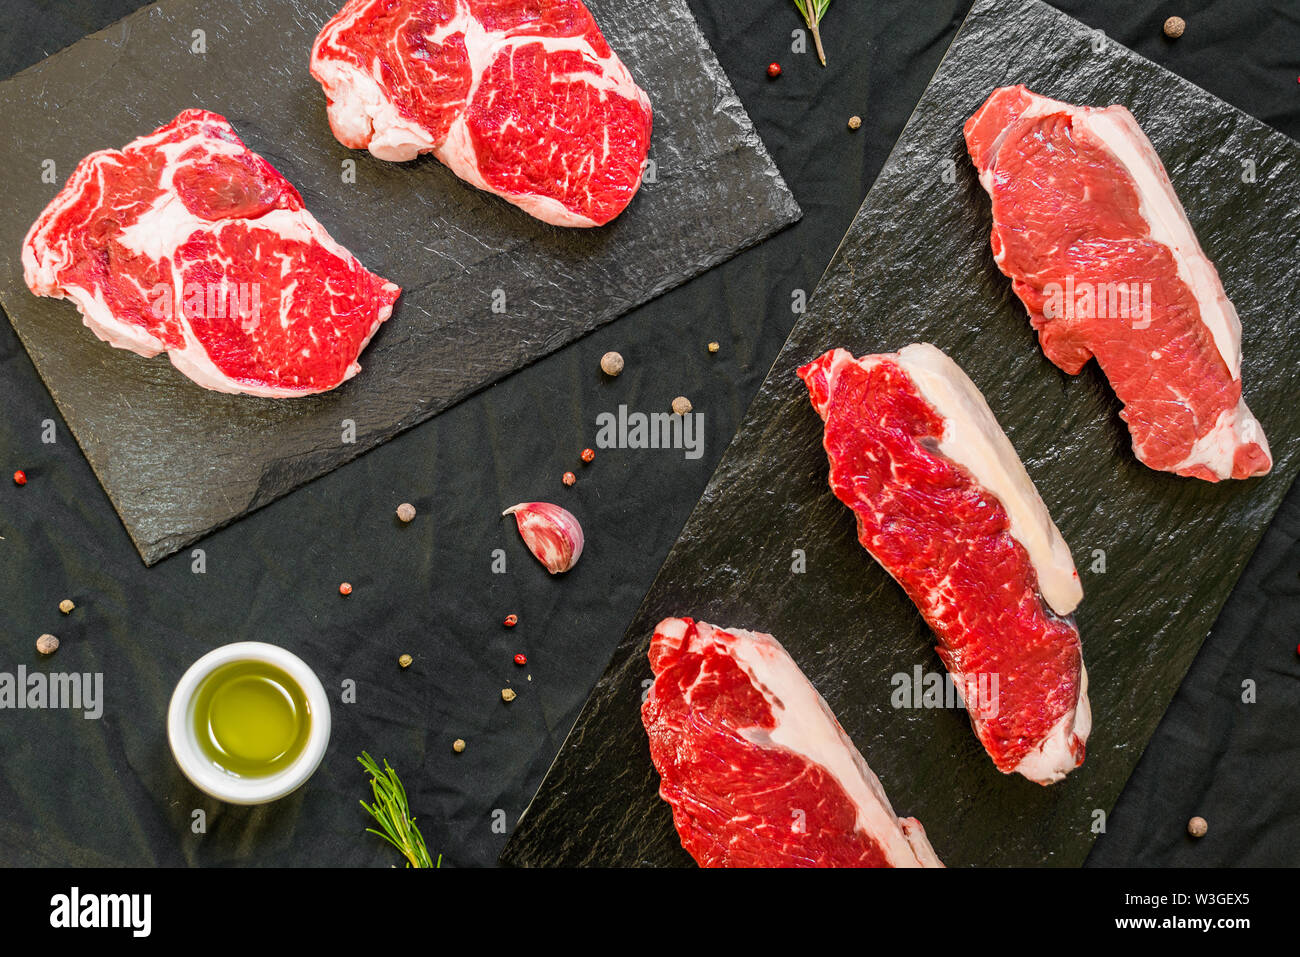 Beef cow meat steaks with spices and herbs against black background Stock Photo